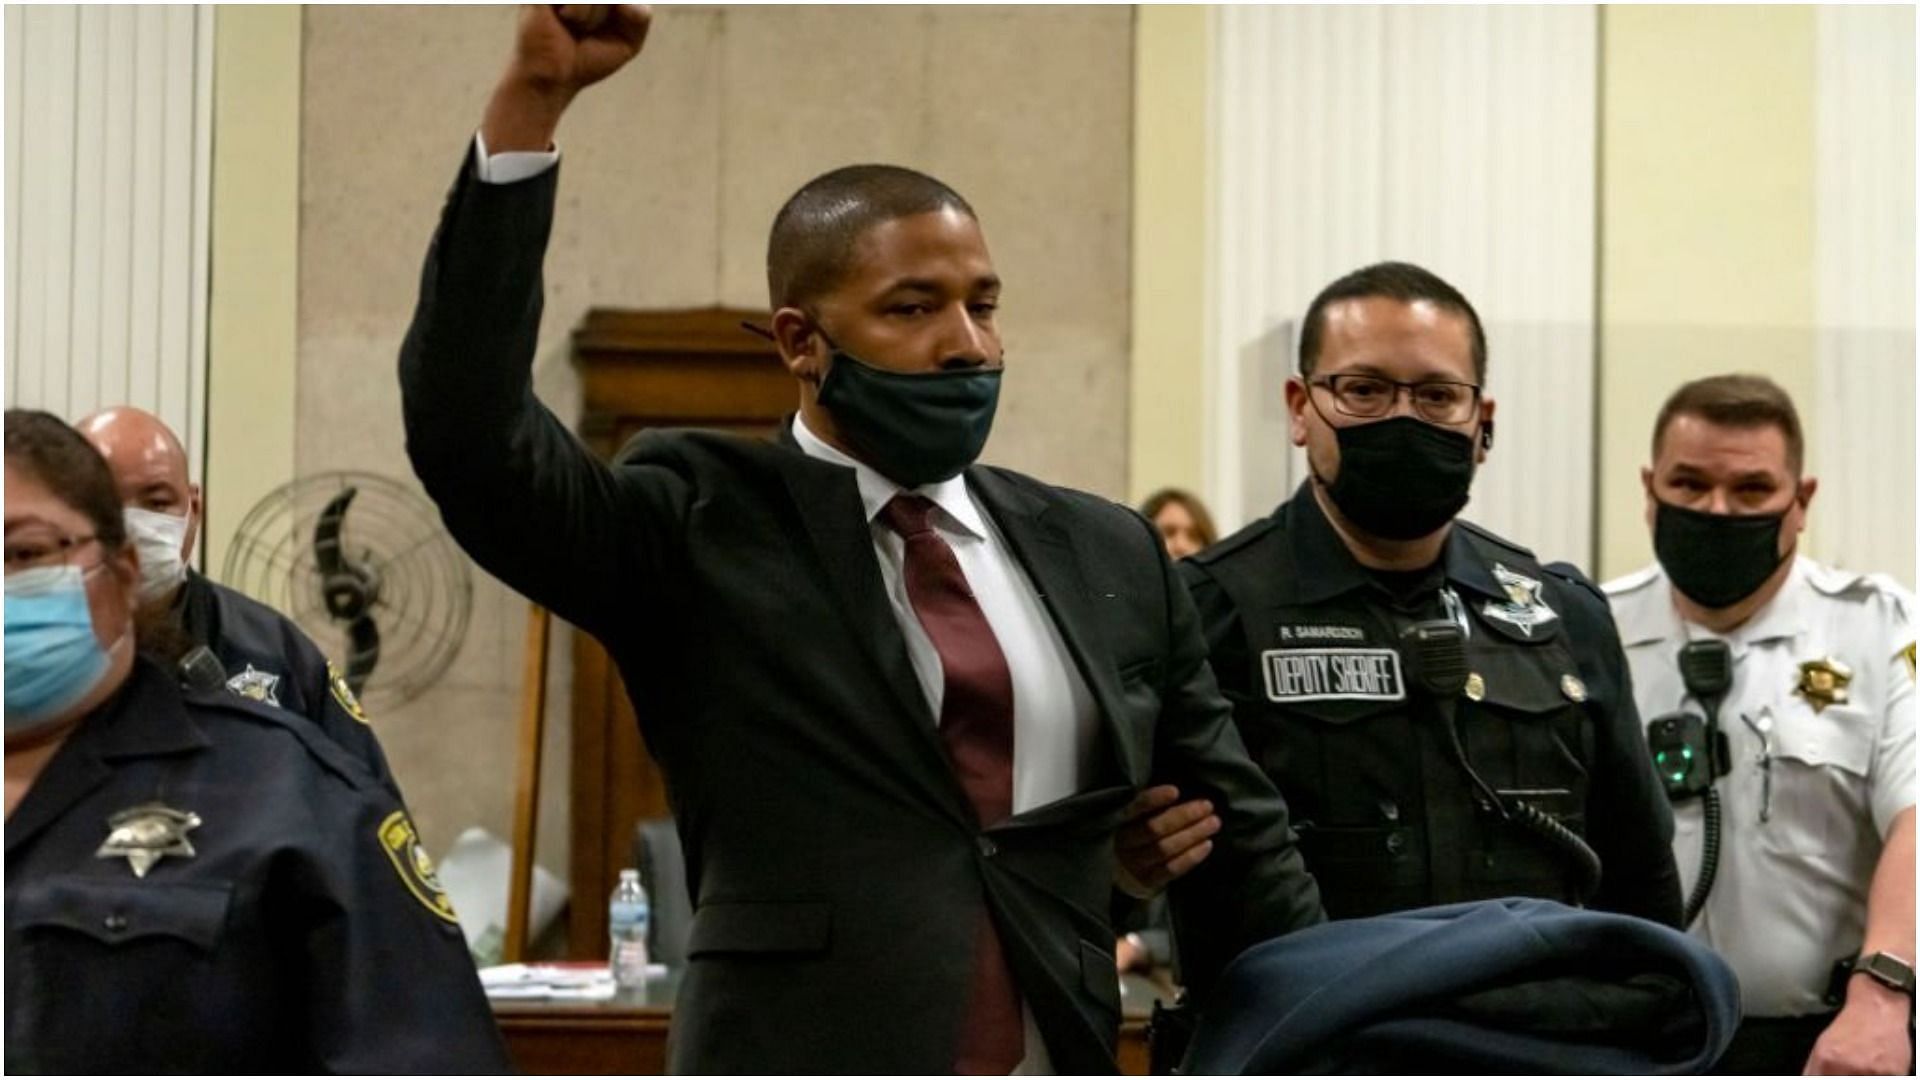 Jussie Smollett has been sentenced to 150 days in prison (Image via Getty Images/Brian Cassella-Pool)